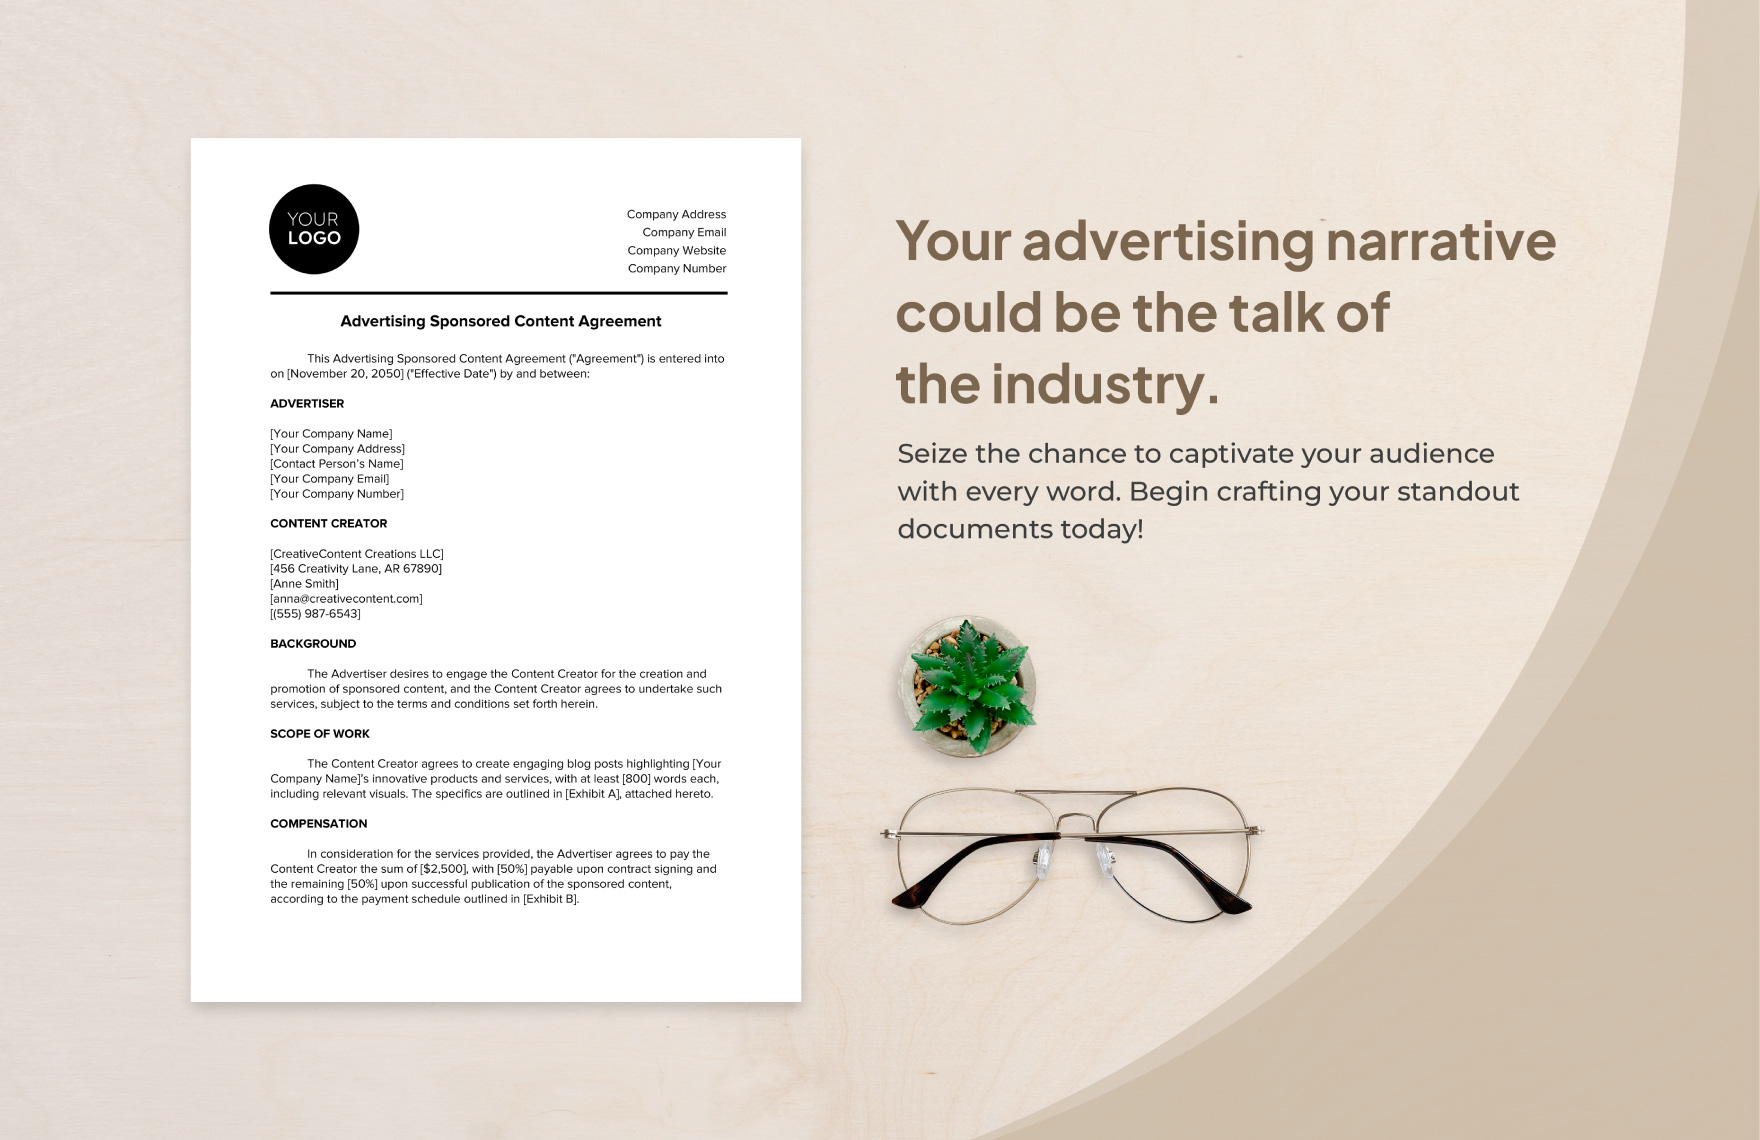 Advertising Sponsored Content Agreement Template